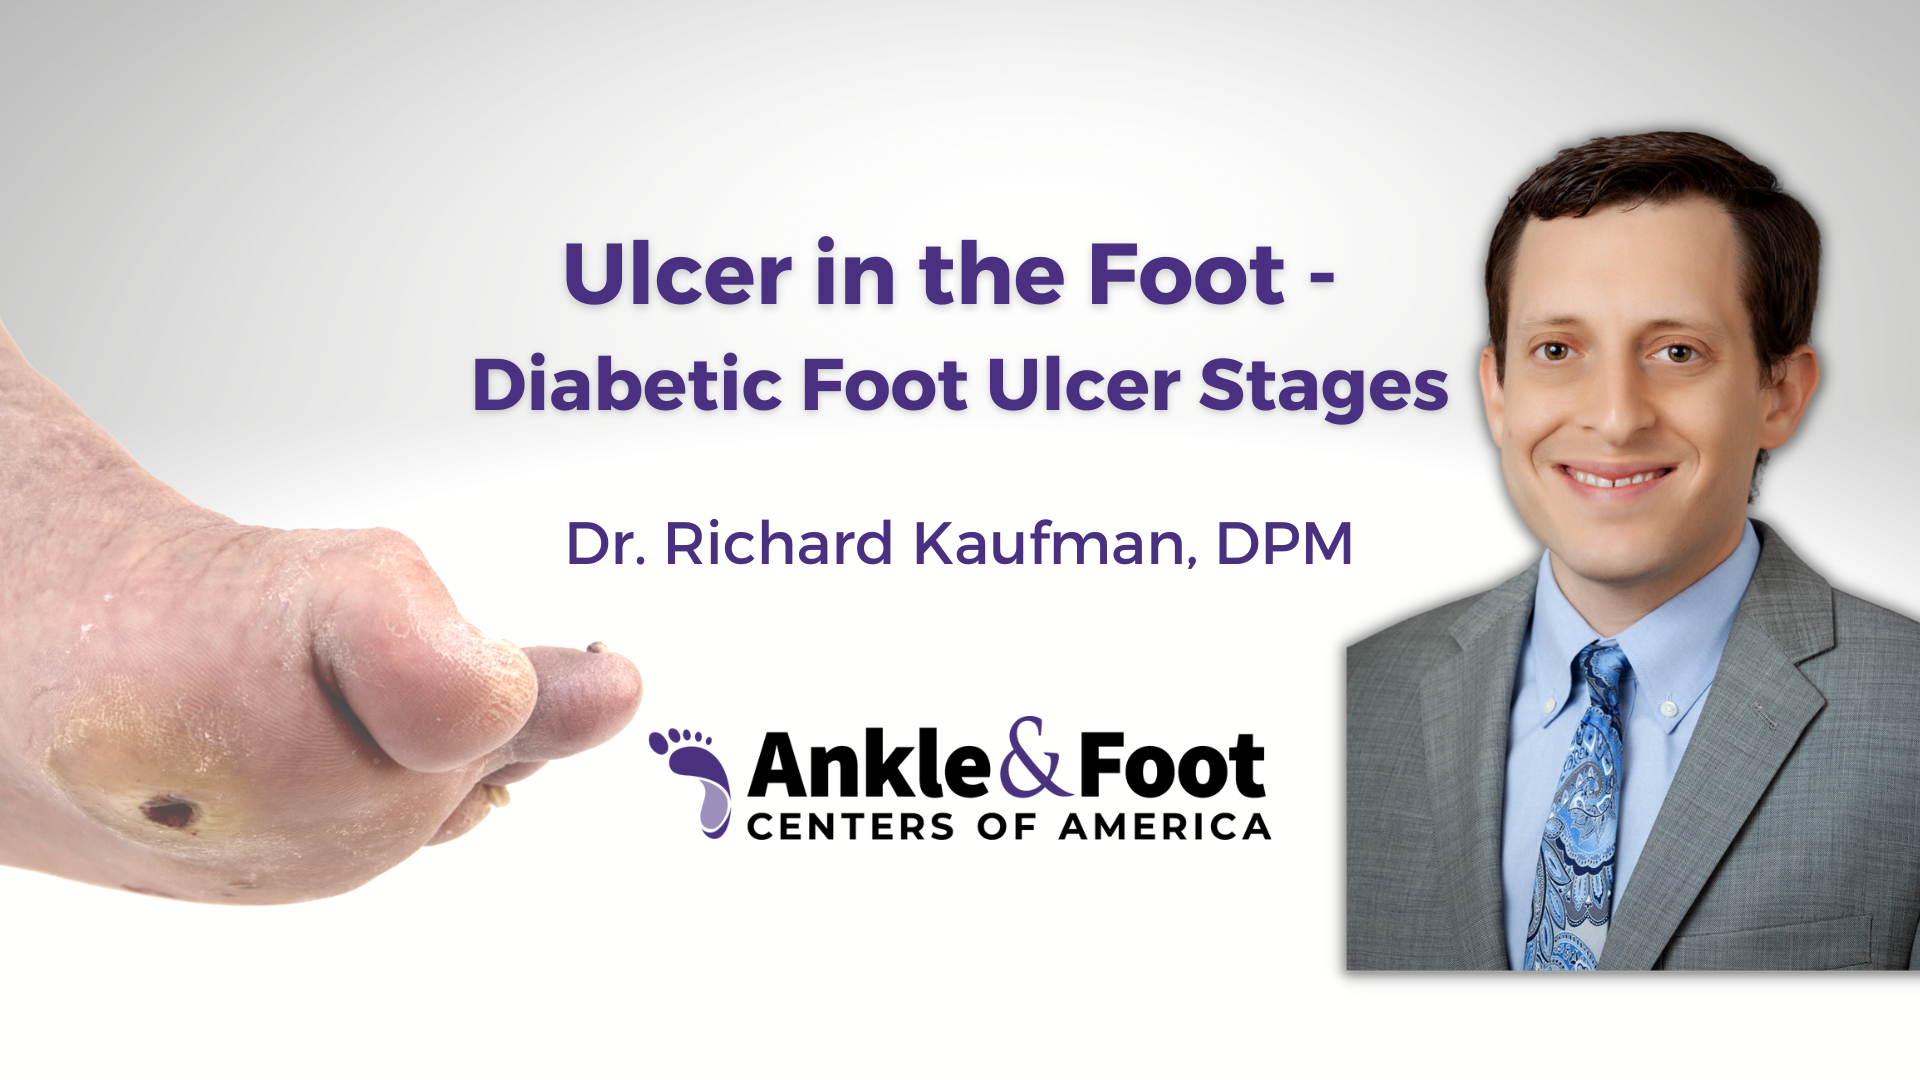 Ulcer in the Foot – Diabetic Foot Ulcer Stages